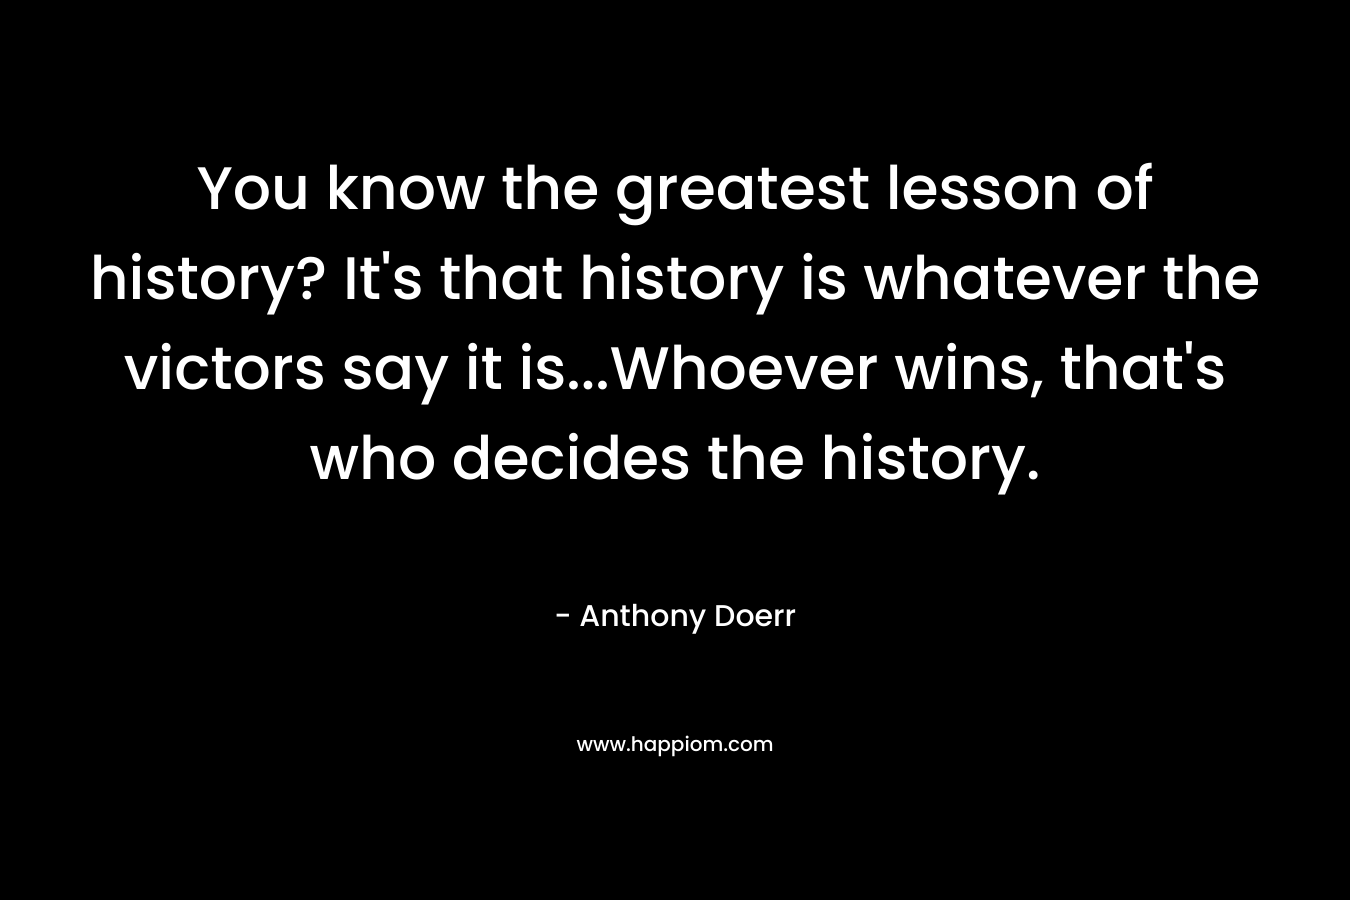 You know the greatest lesson of history? It's that history is whatever the victors say it is...Whoever wins, that's who decides the history.